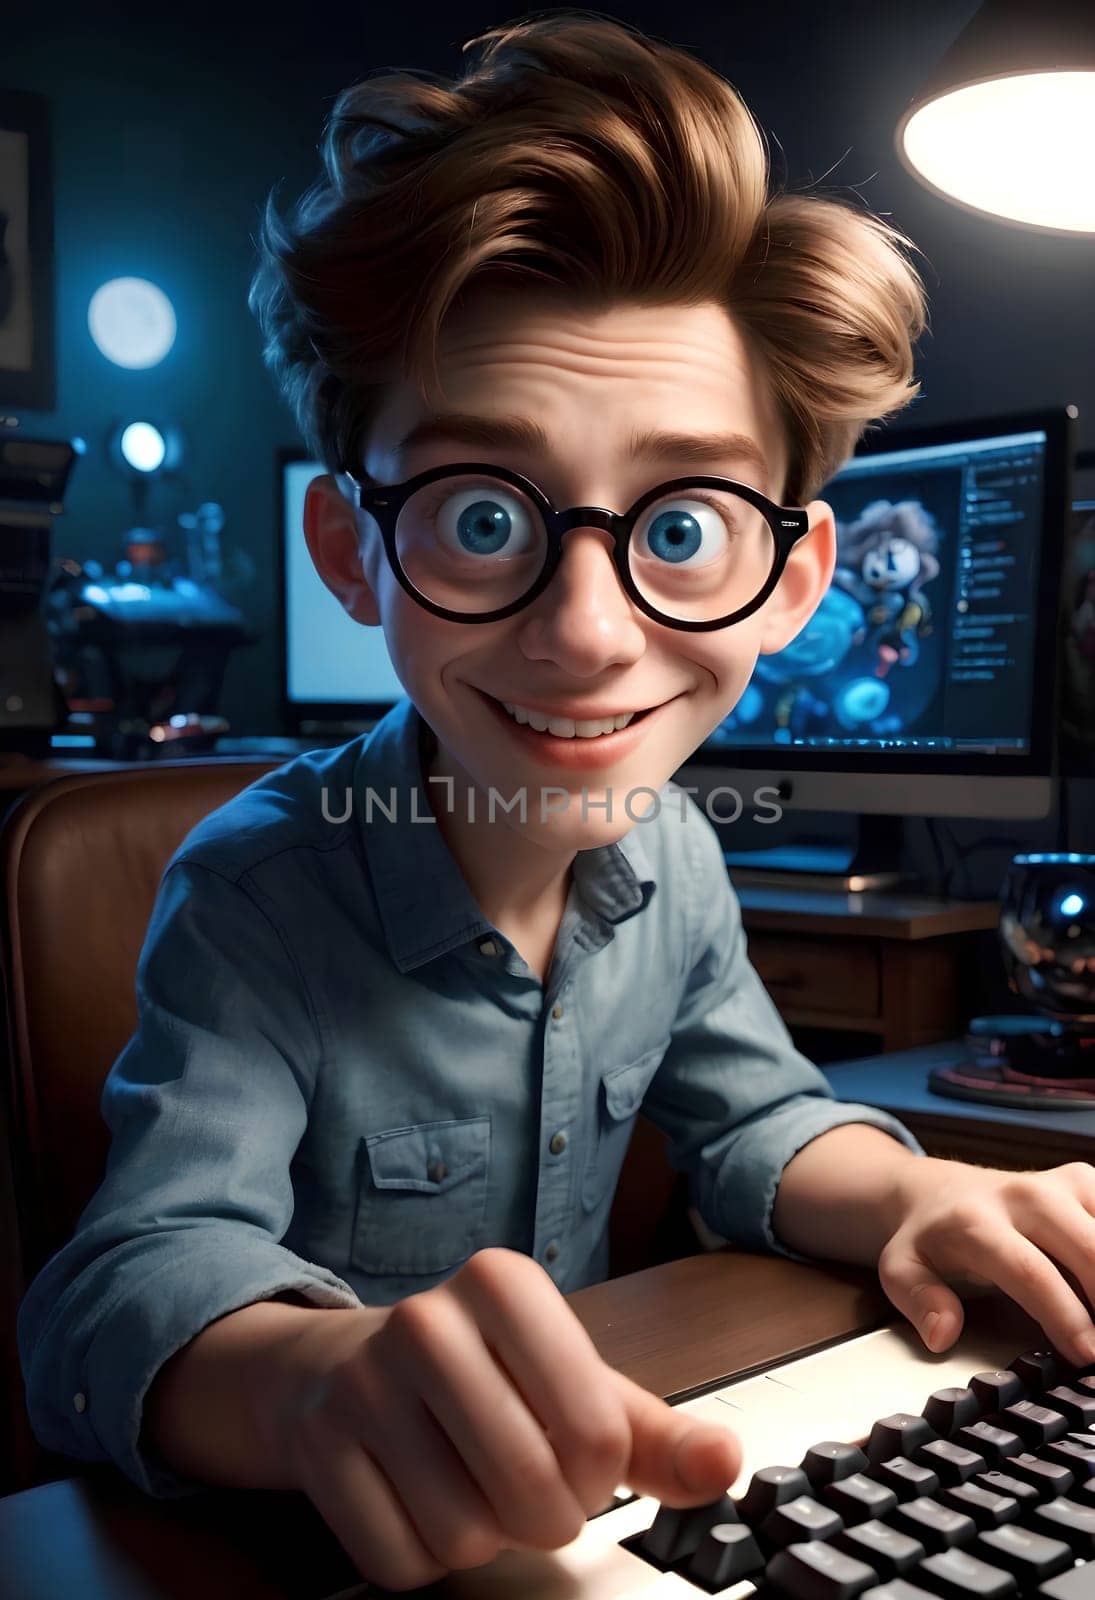 Ultra Realistic animated portrait of a webmaster sitting near a computer monitor with big round eyes. AI generated image.